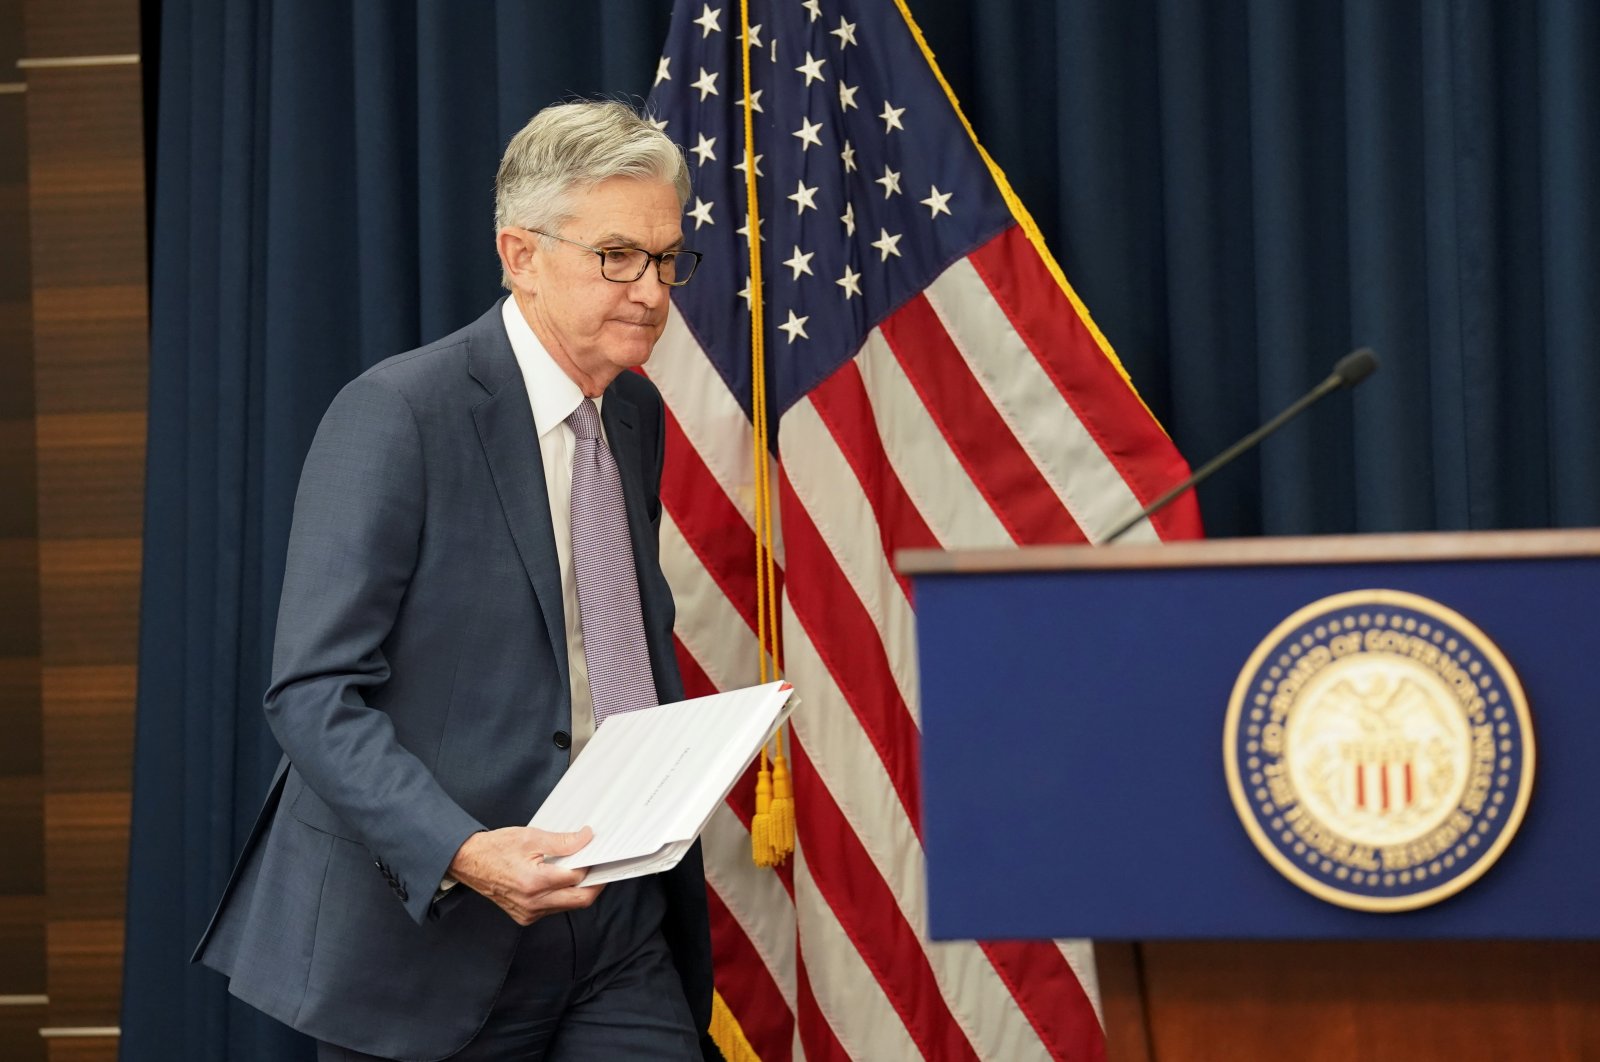 U.S. Federal Reserve Chairman Jerome Powell arrives to speak to reporters after the Federal Reserve cut interest rates in an emergency move designed to shield the world's largest economy from the impact of the coronavirus, during a news conference in Washington, U.S., March 3, 2020. (Reuters Photo)